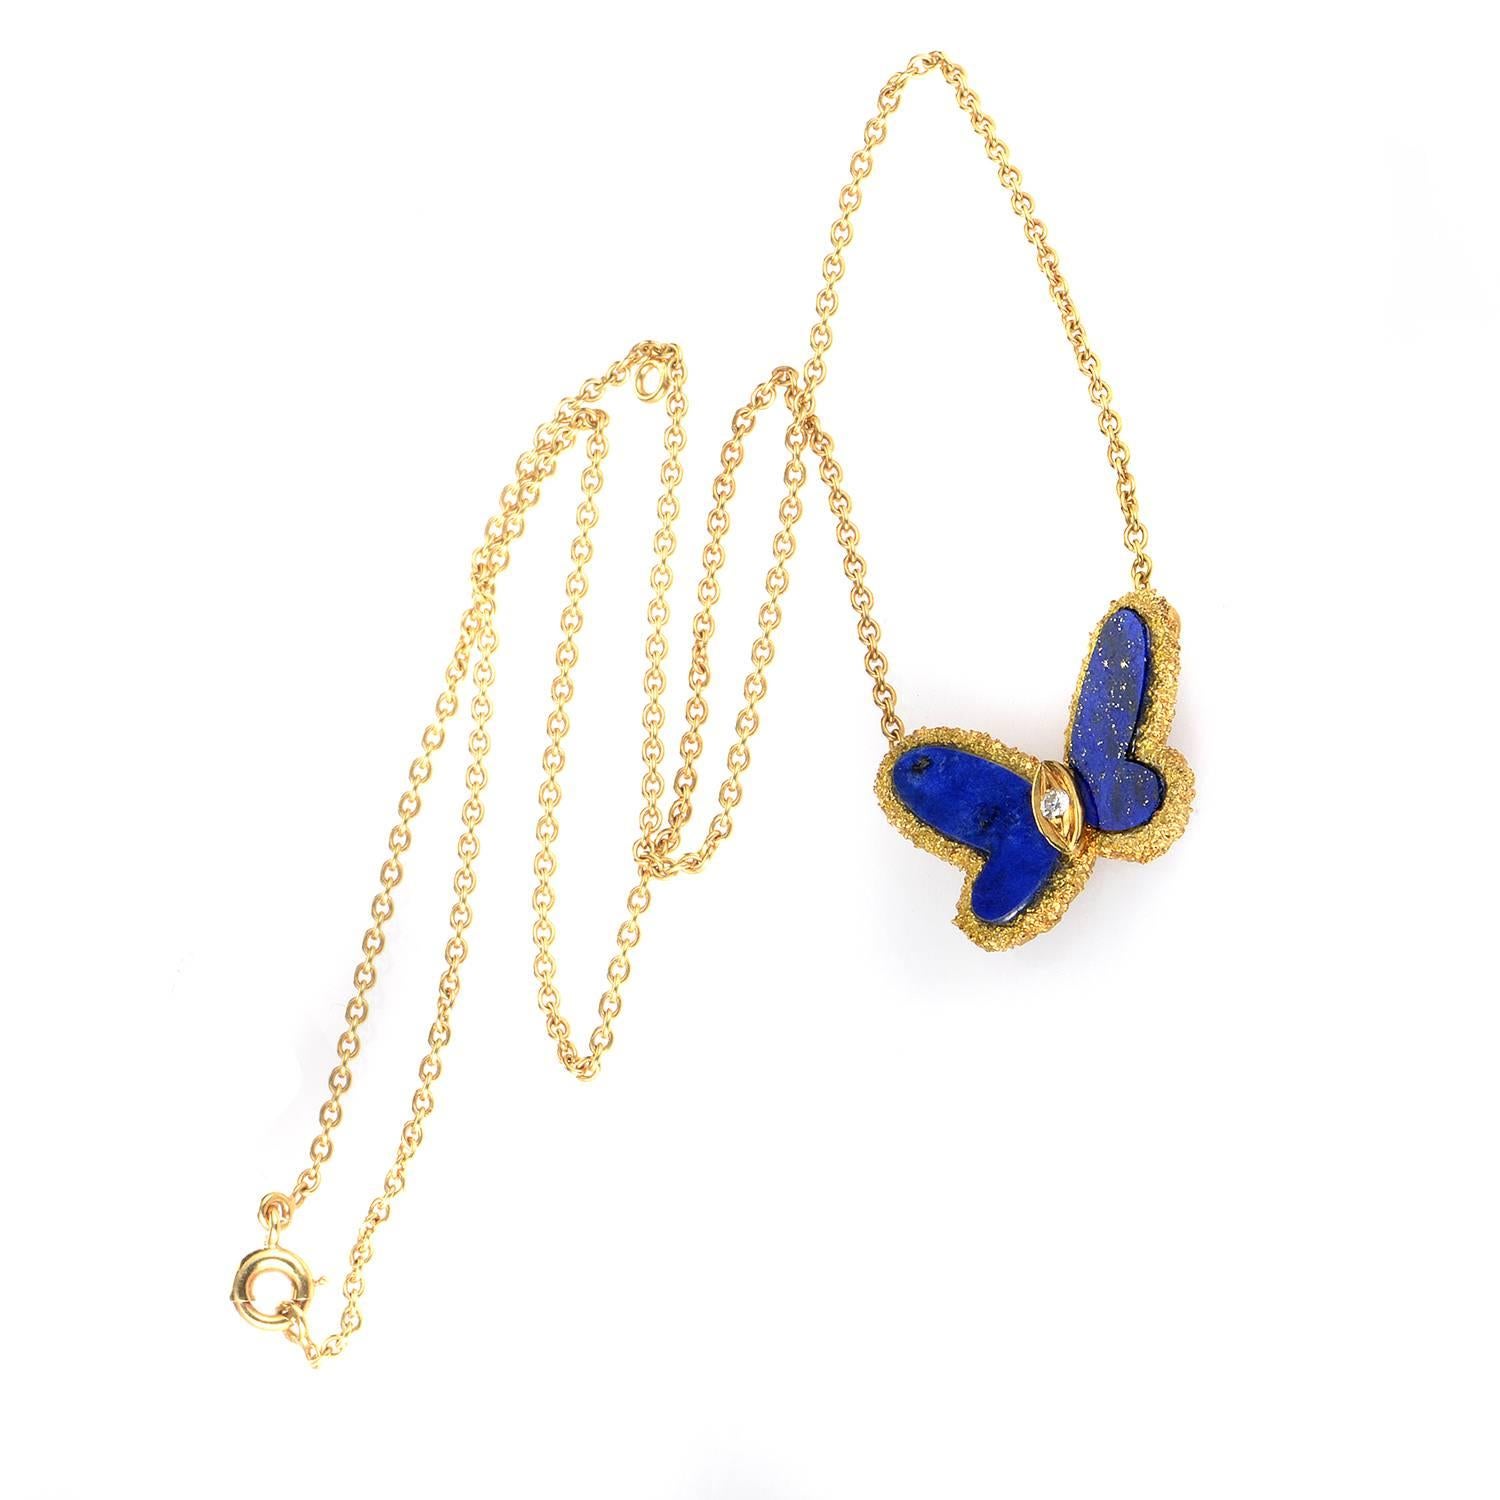 Bold and beautiful are the perfect words to describe this luxurious necklace from Van Cleef & Arpels. The necklace is made of 18K yellow gold and boasts a beautiful butterfly with blue lapis wings and a diamond-set body.
Approximate Dimensions: